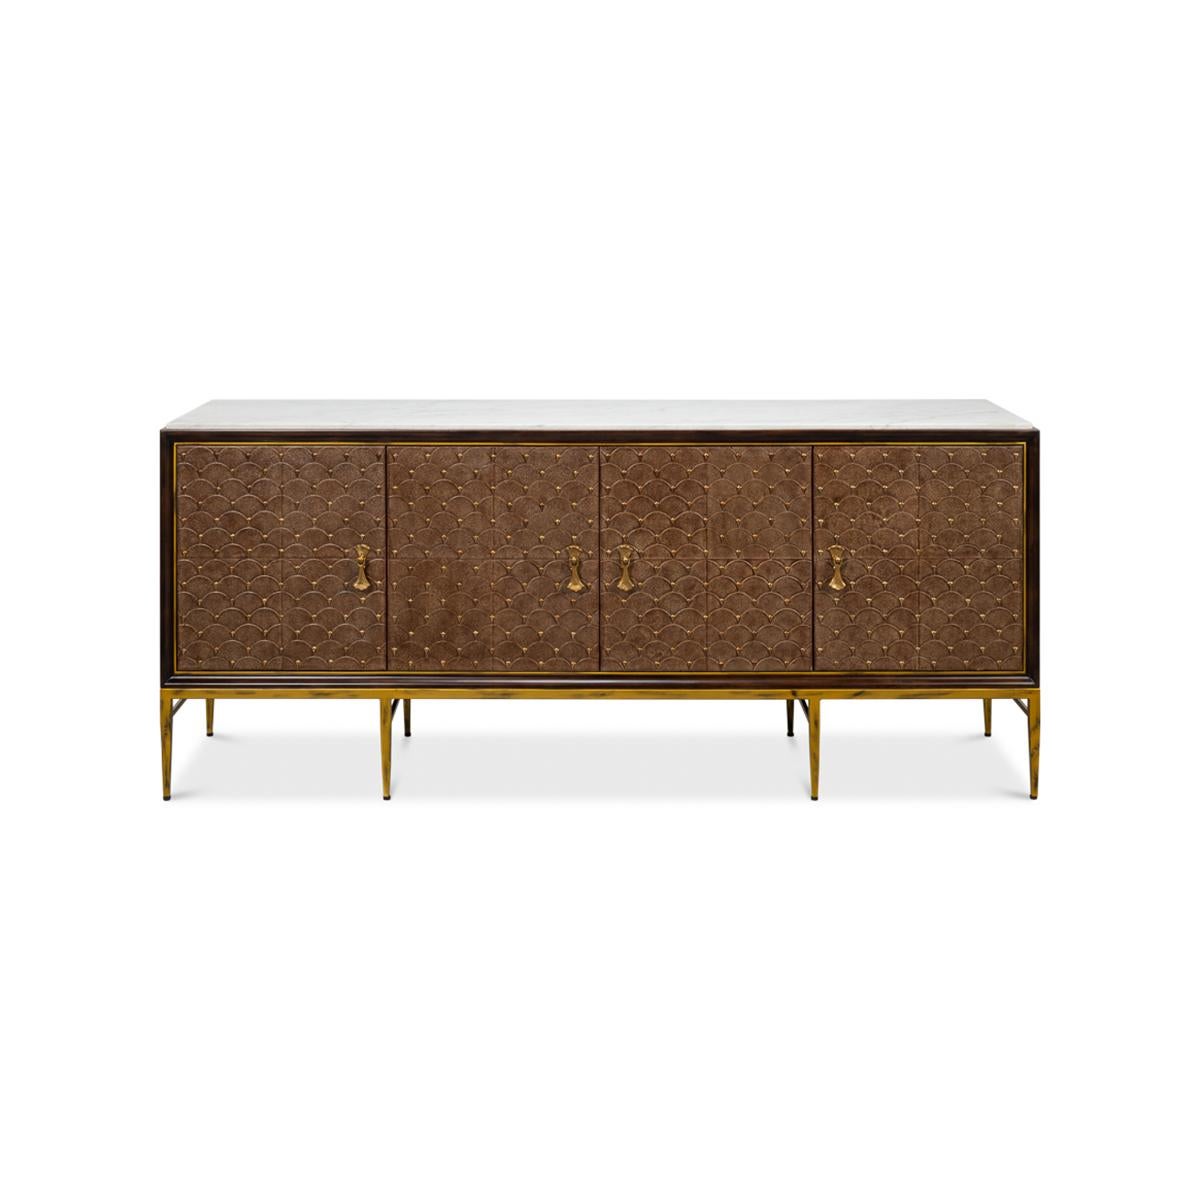 This beautifully crafted sideboard is a striking example of mid-century modern design reimagined for contemporary living. The unit features rich, dark tones contrasted by the Italian Satuario Marble top and gilded highlights.

The front of the